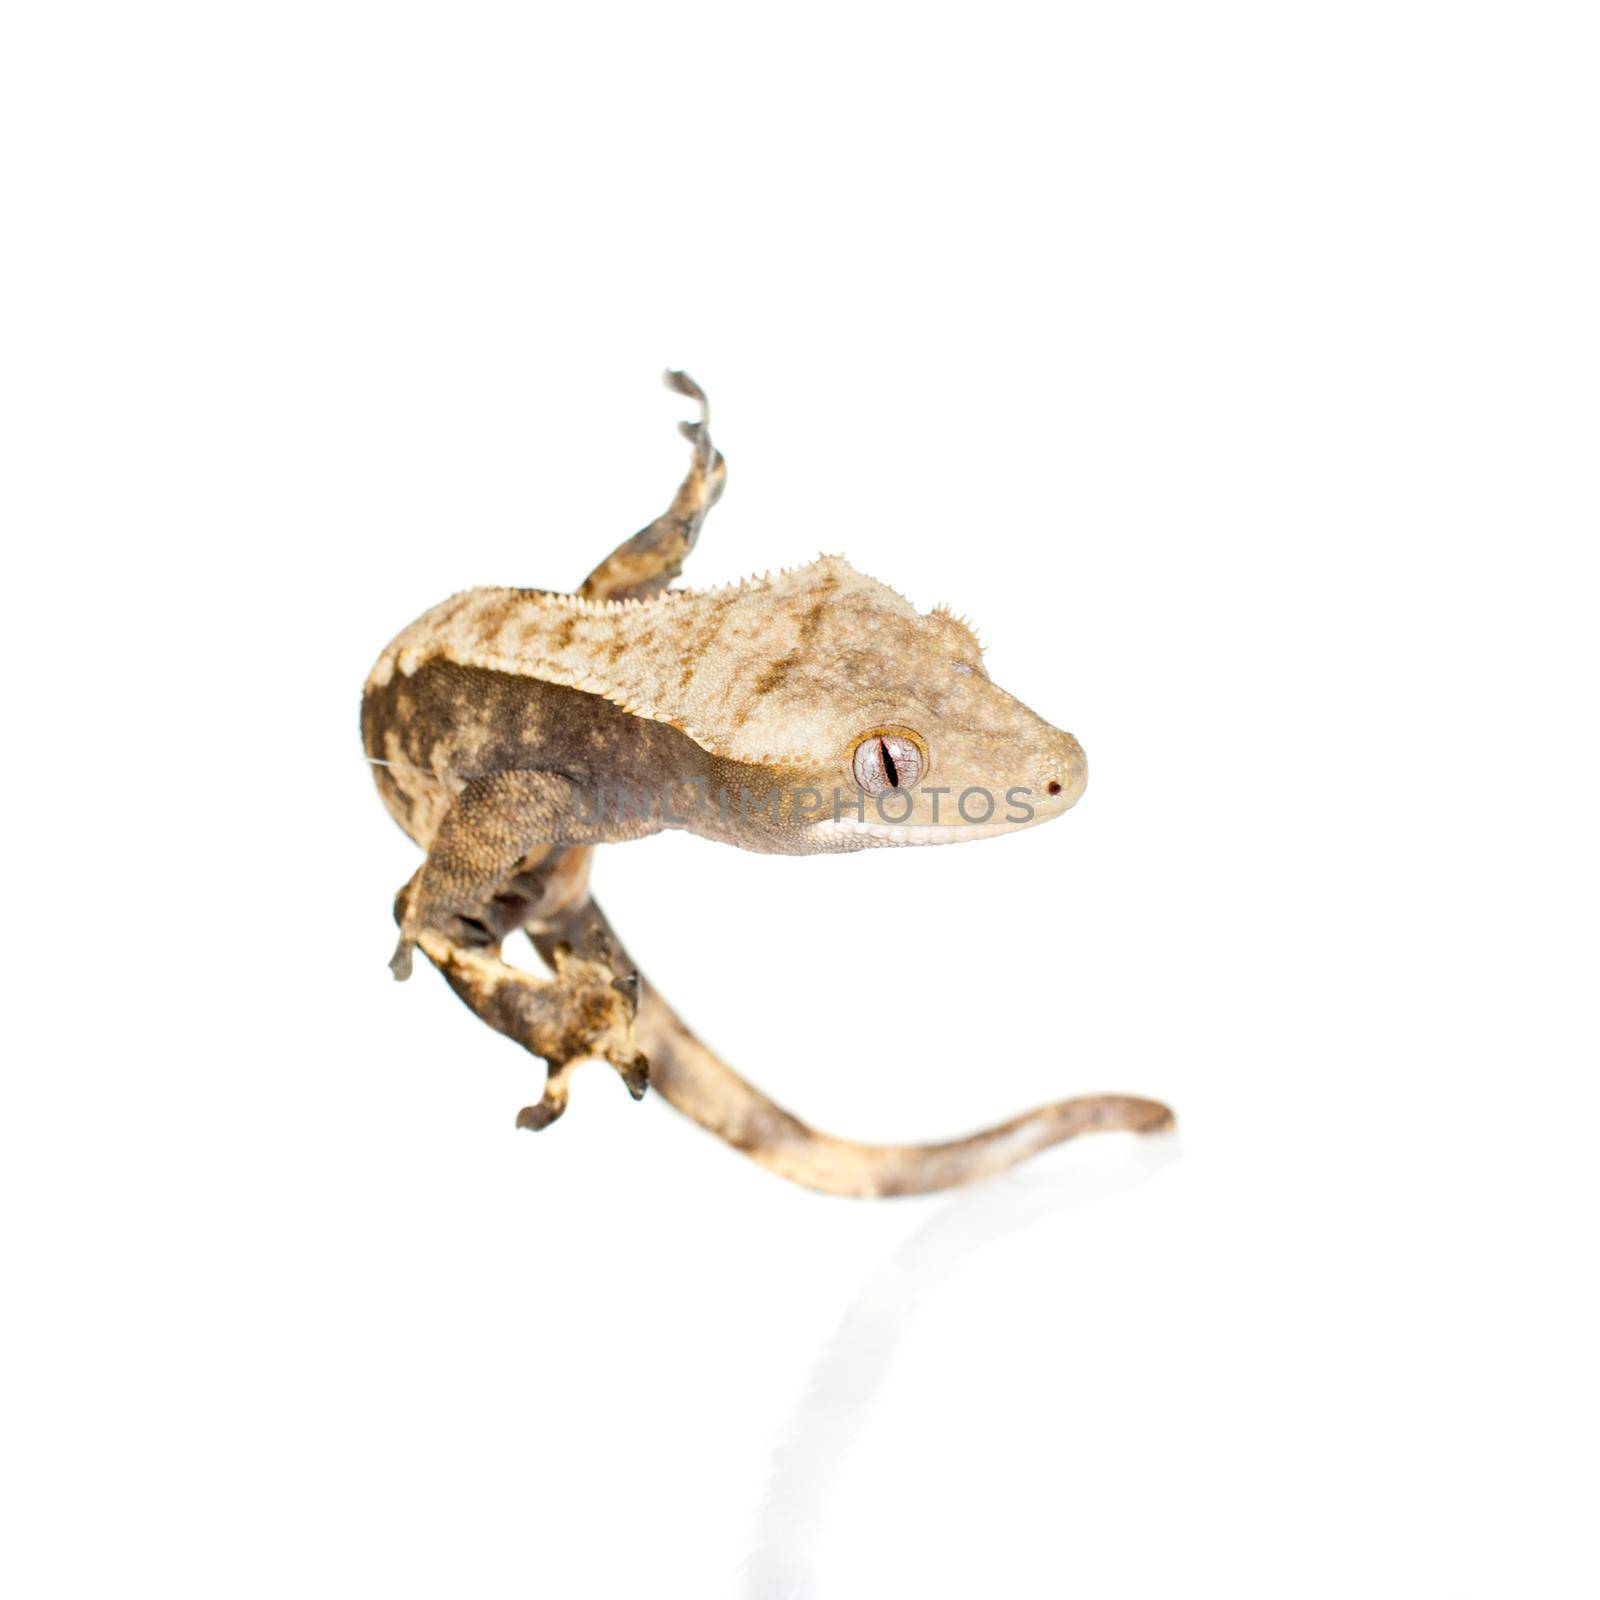 New Caledonian crested gecko isolated on white by RosaJay